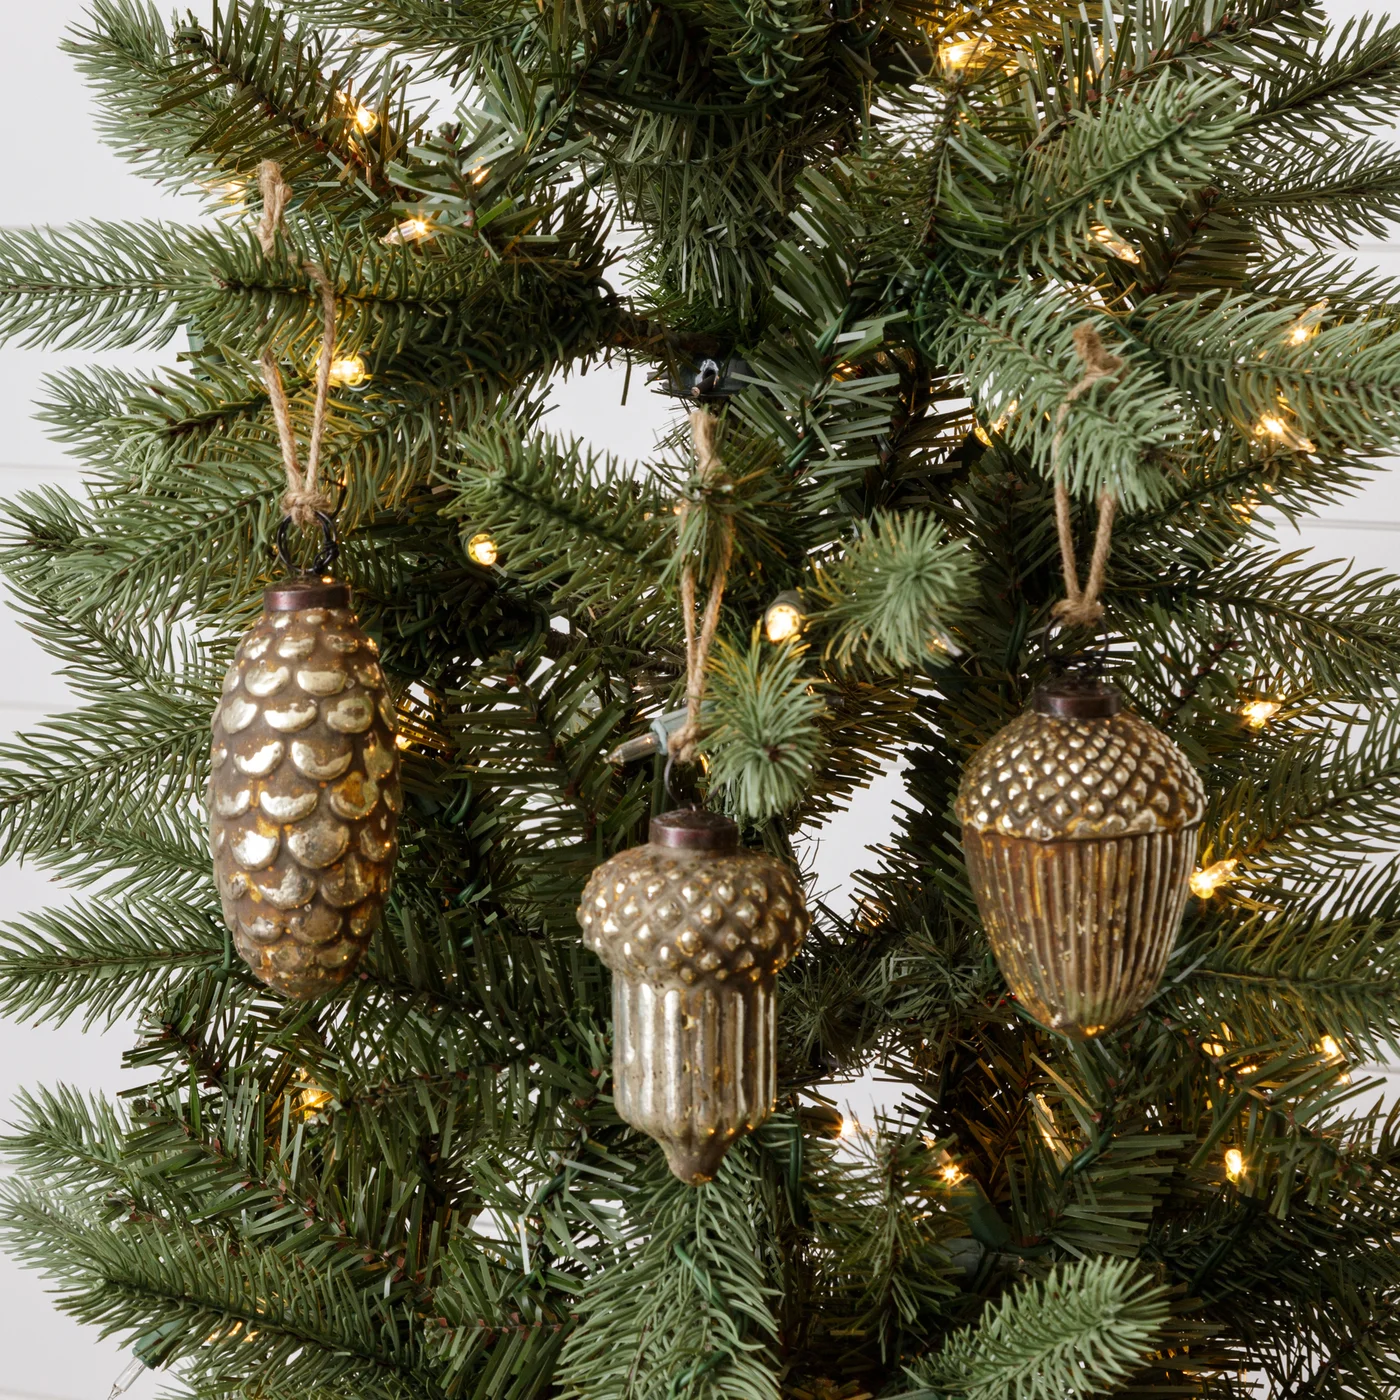 Set of 3 Rustic Pinecone and Acorn Glass Ornaments